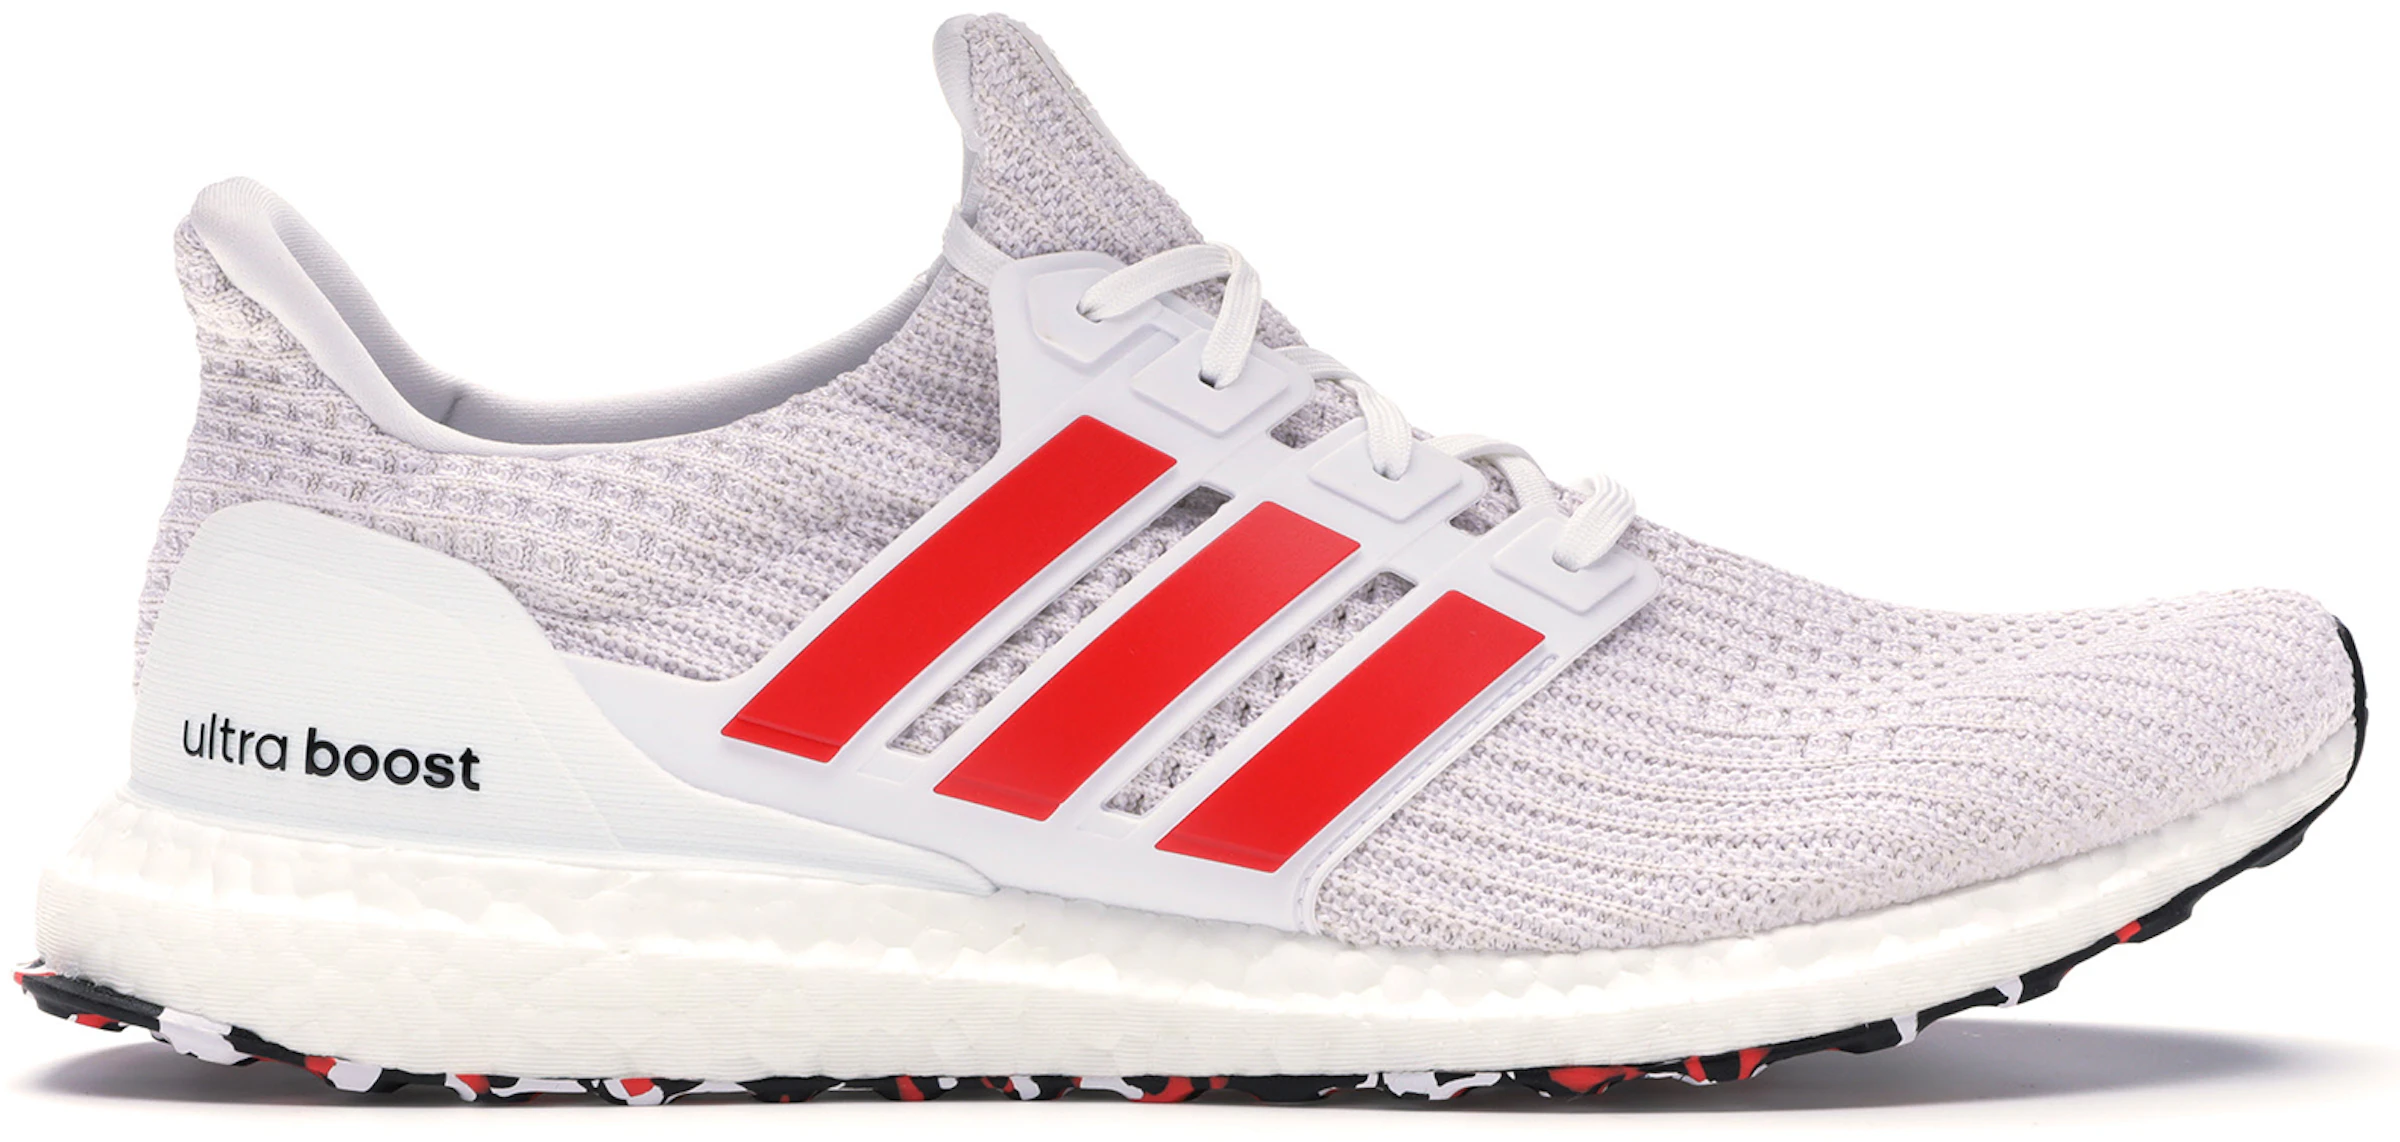 adidas Ultra Boost 4.0 Cloud White Active Red - DB3199 - US